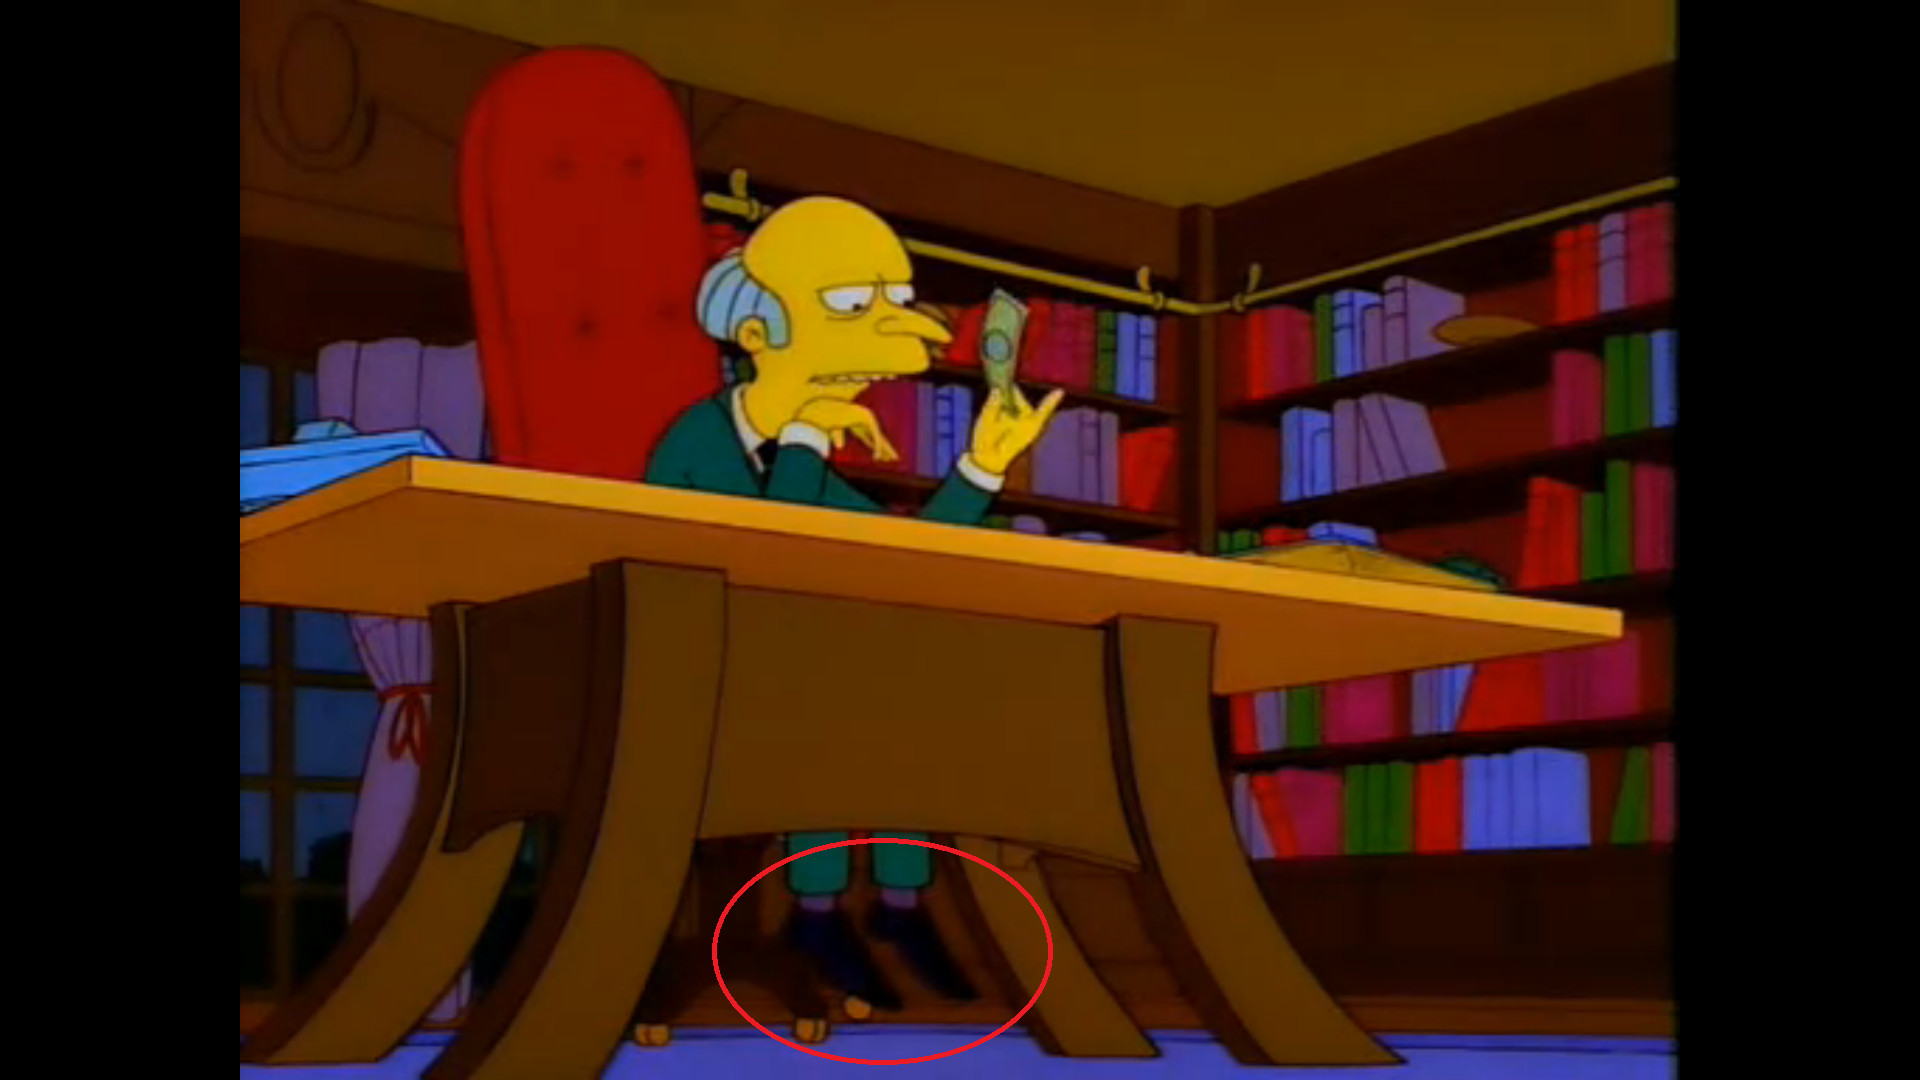 Mr. Burns feet dont touch the floor under his desk